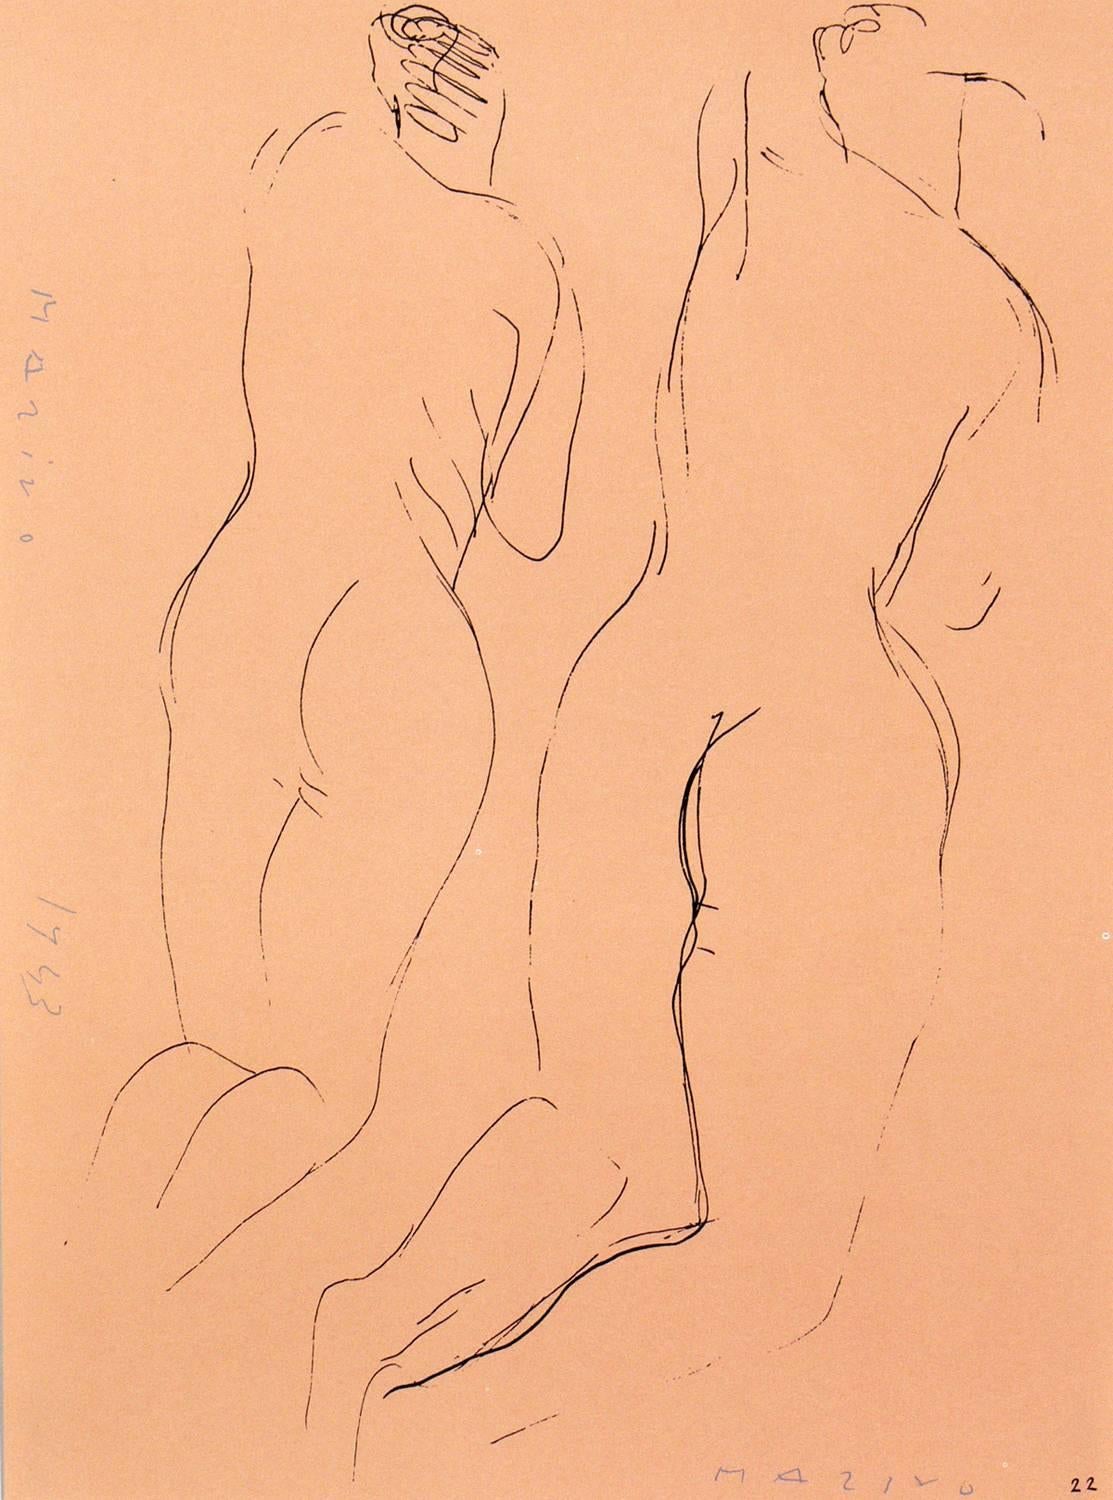 Pair of Nude Figural lithographs by Marino Marini, from the Marino Marini portfolio, printed by Carl Schünemann, Germany, circa 1968. They have been framed in clean lined black lacquer gallery frames.